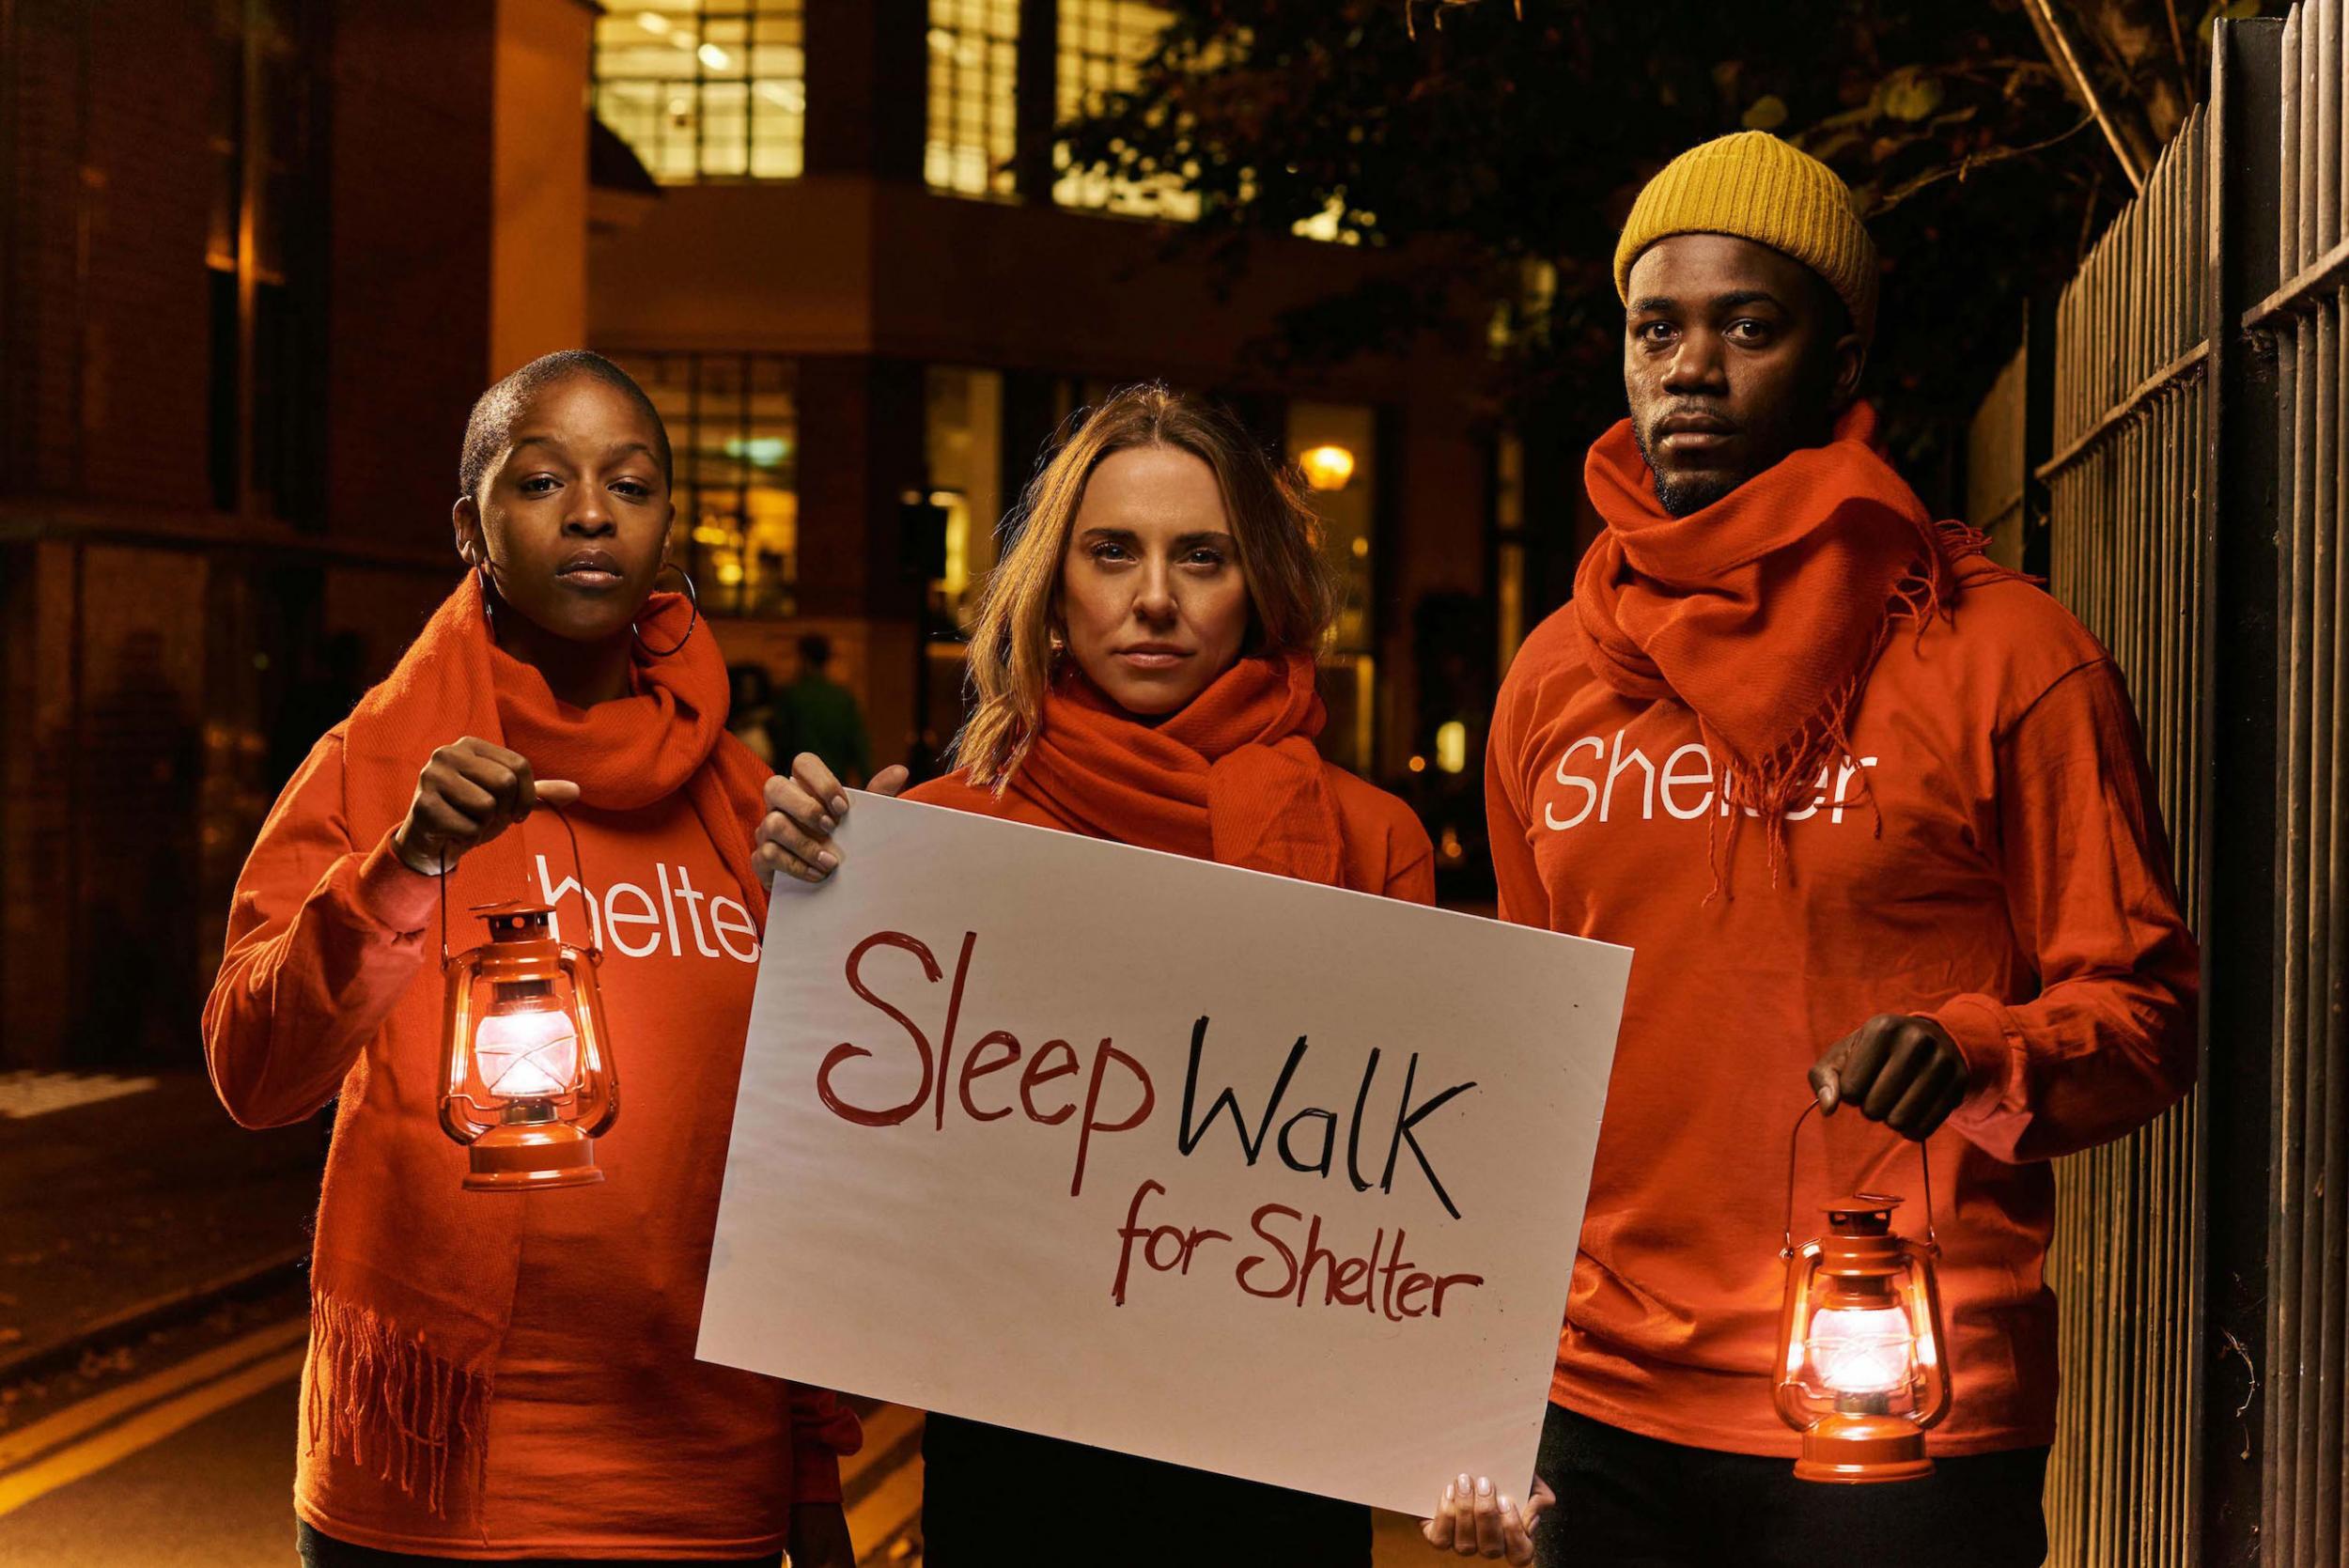 Mel C, Julie Adenuga and Mo Gilligan will be taking part in the first Sleep Walk for Shelter